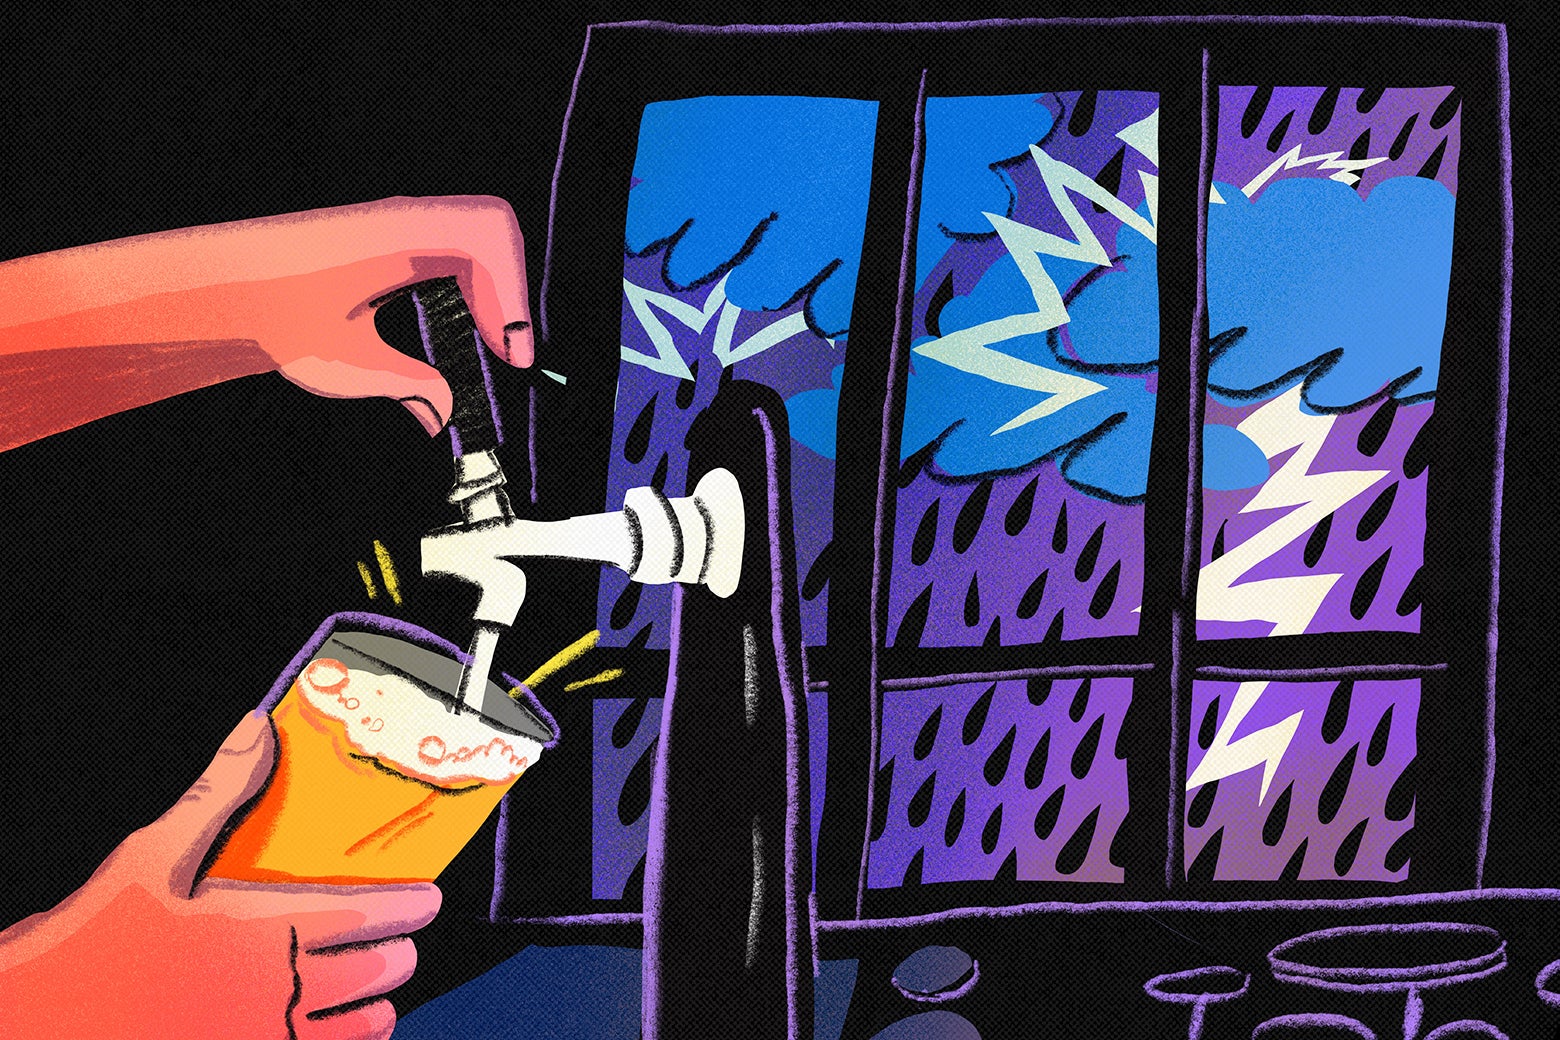 An illustration of a hand pouring beer into a glass from a tap. Outside a window, lightning strikes and rain falls.